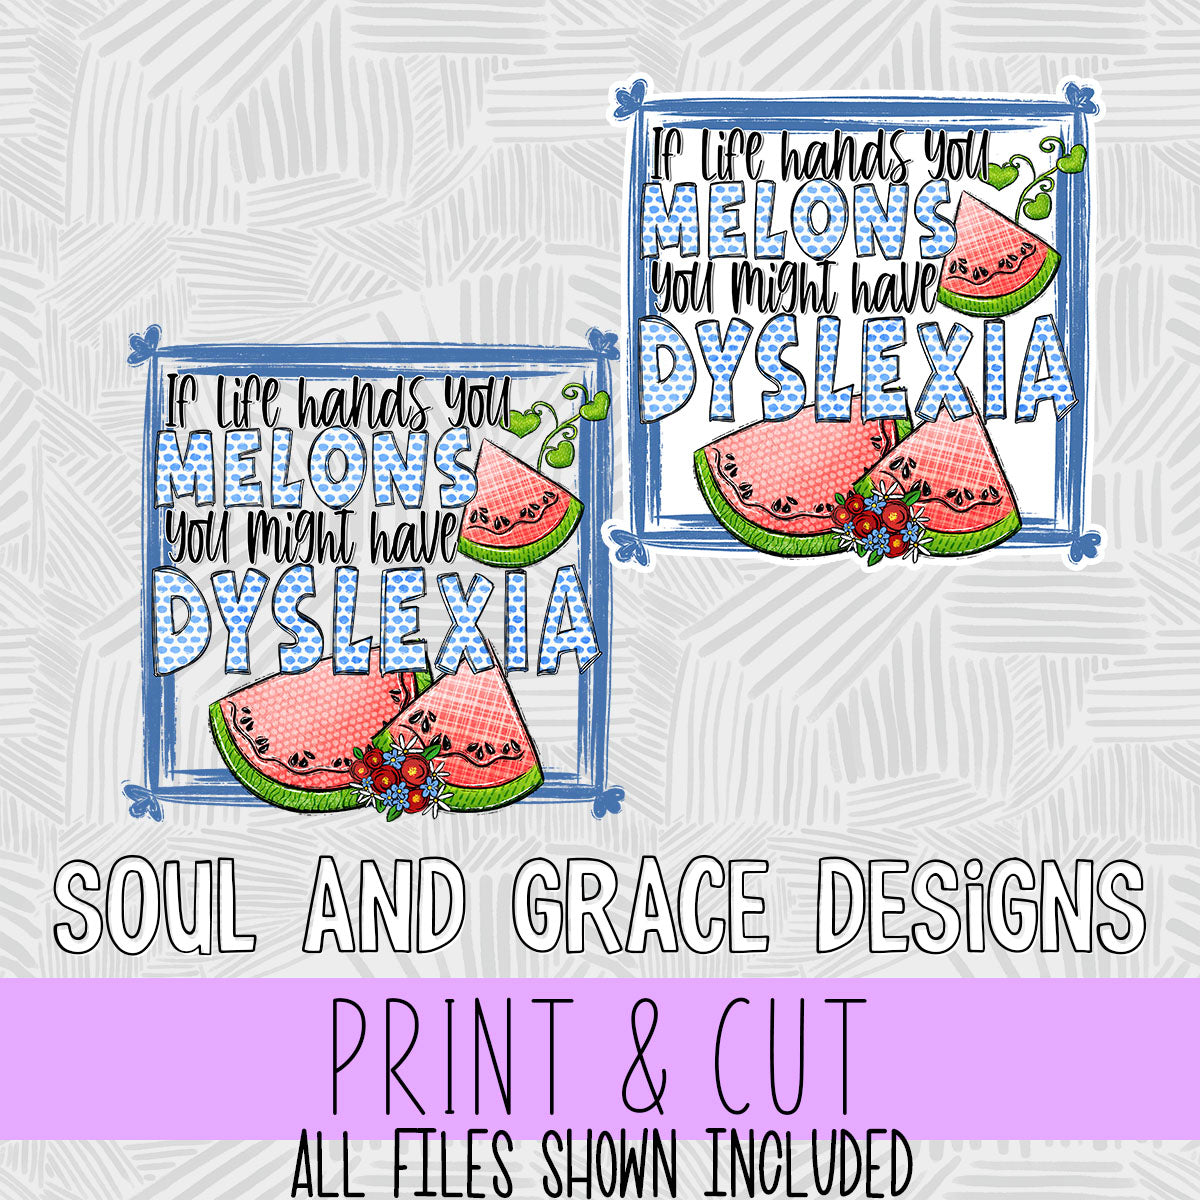 If Life Hands You Melons You Might Have Dyslexia  [Print & Cut Sticker]